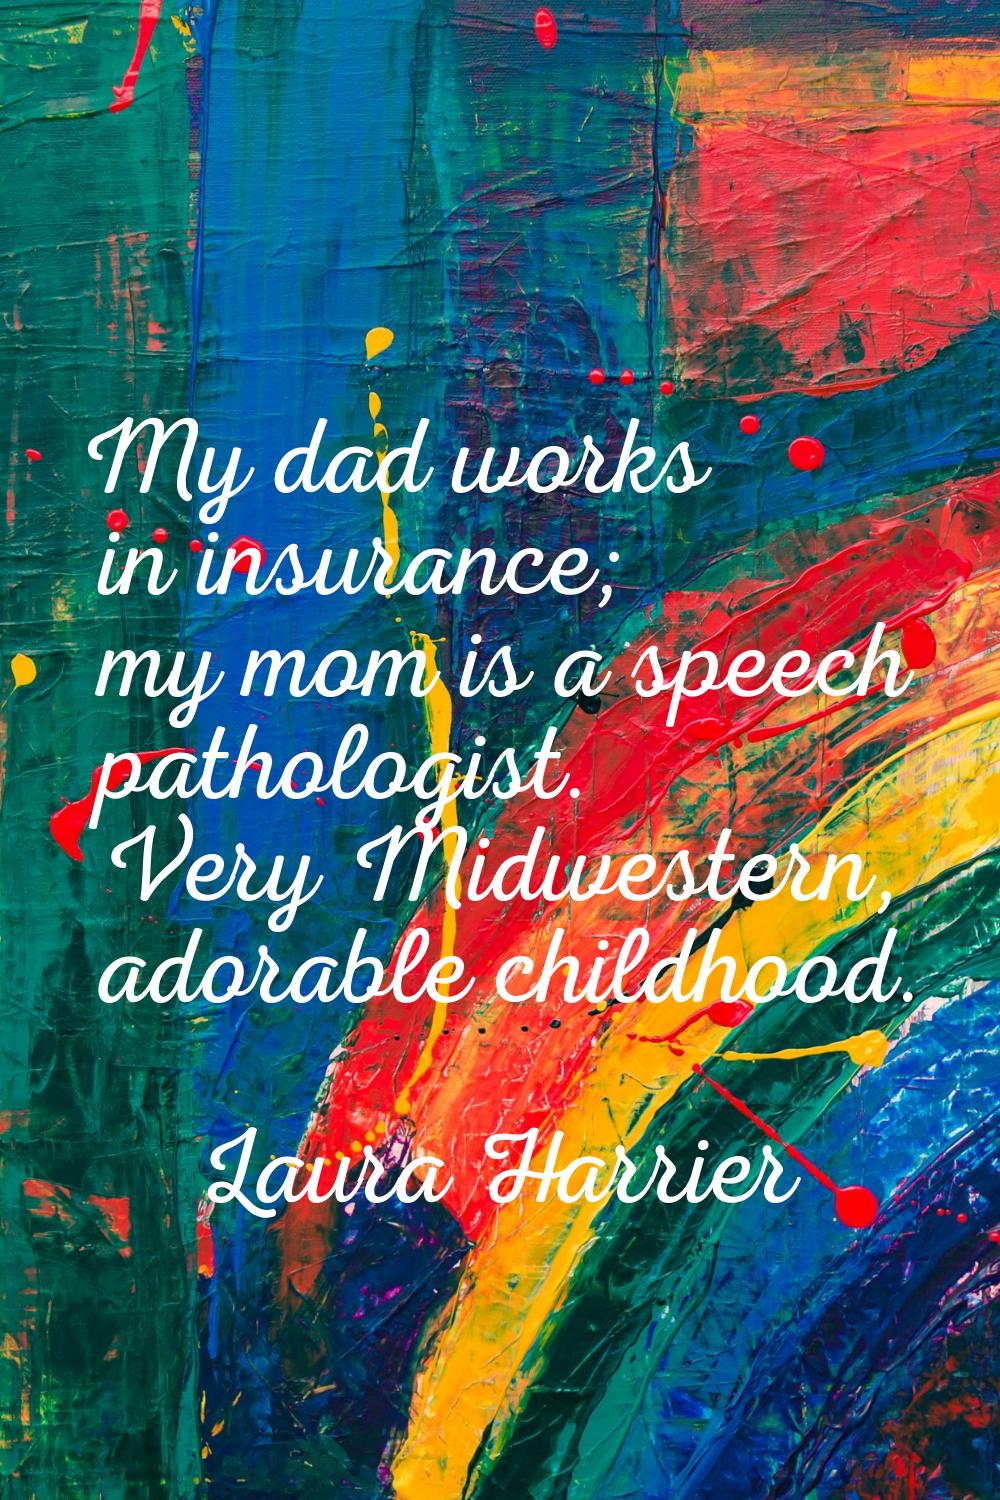 My dad works in insurance; my mom is a speech pathologist. Very Midwestern, adorable childhood.